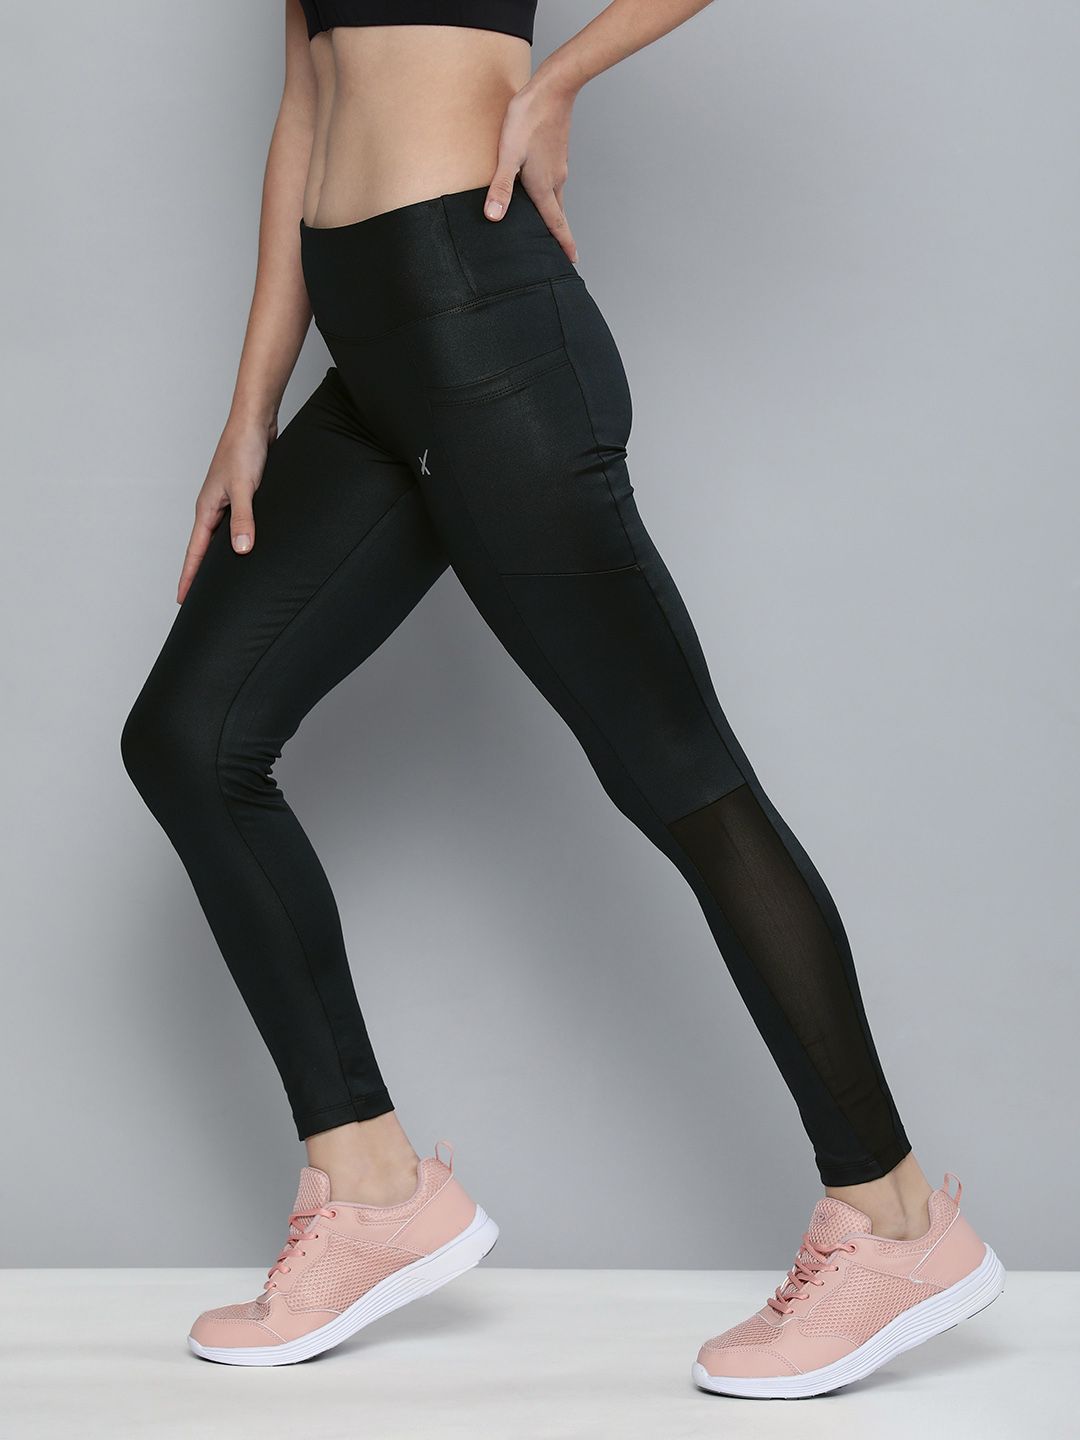 HRX By Hrithik Roshan Women Black Running Rapid-Dry Technology Tights Price in India